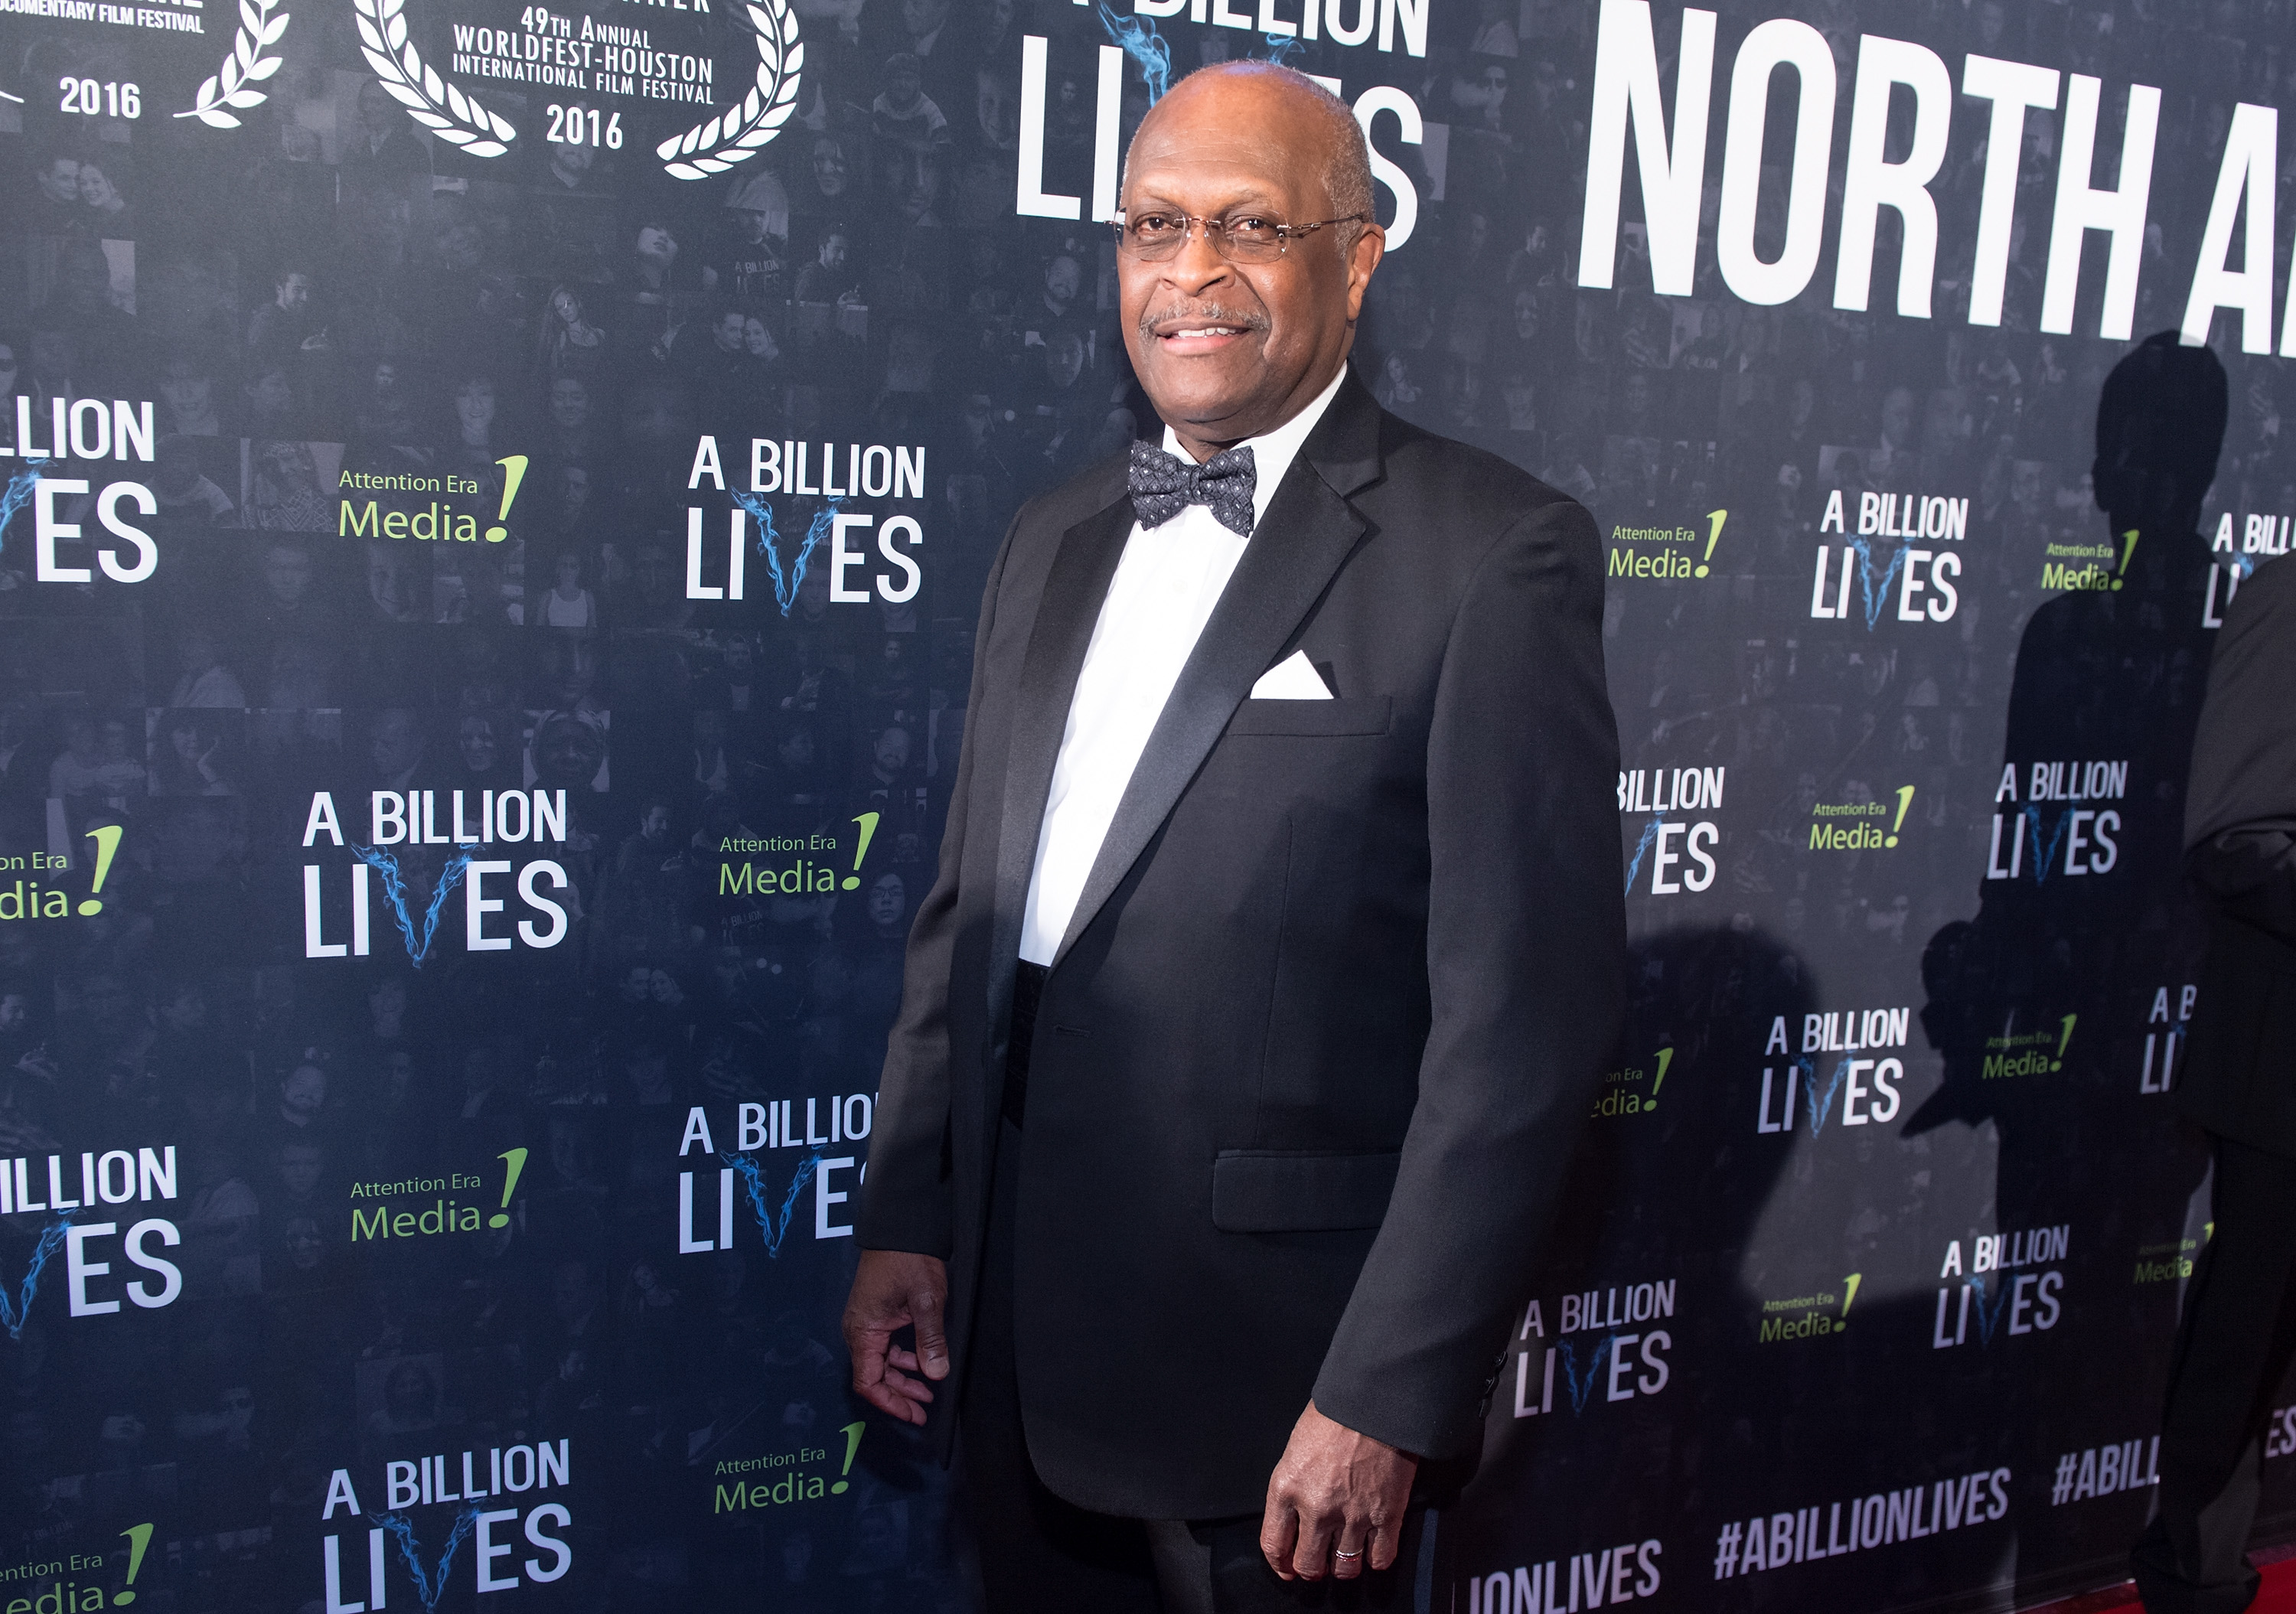 Herman Cain attends the North American premiere of 'A Billion Lives' at Pabst Theater on August 6, 2016 in Milwaukee, Wisconsin. (Photo by Daniel Boczarski/Getty Images for A Billion Lives)